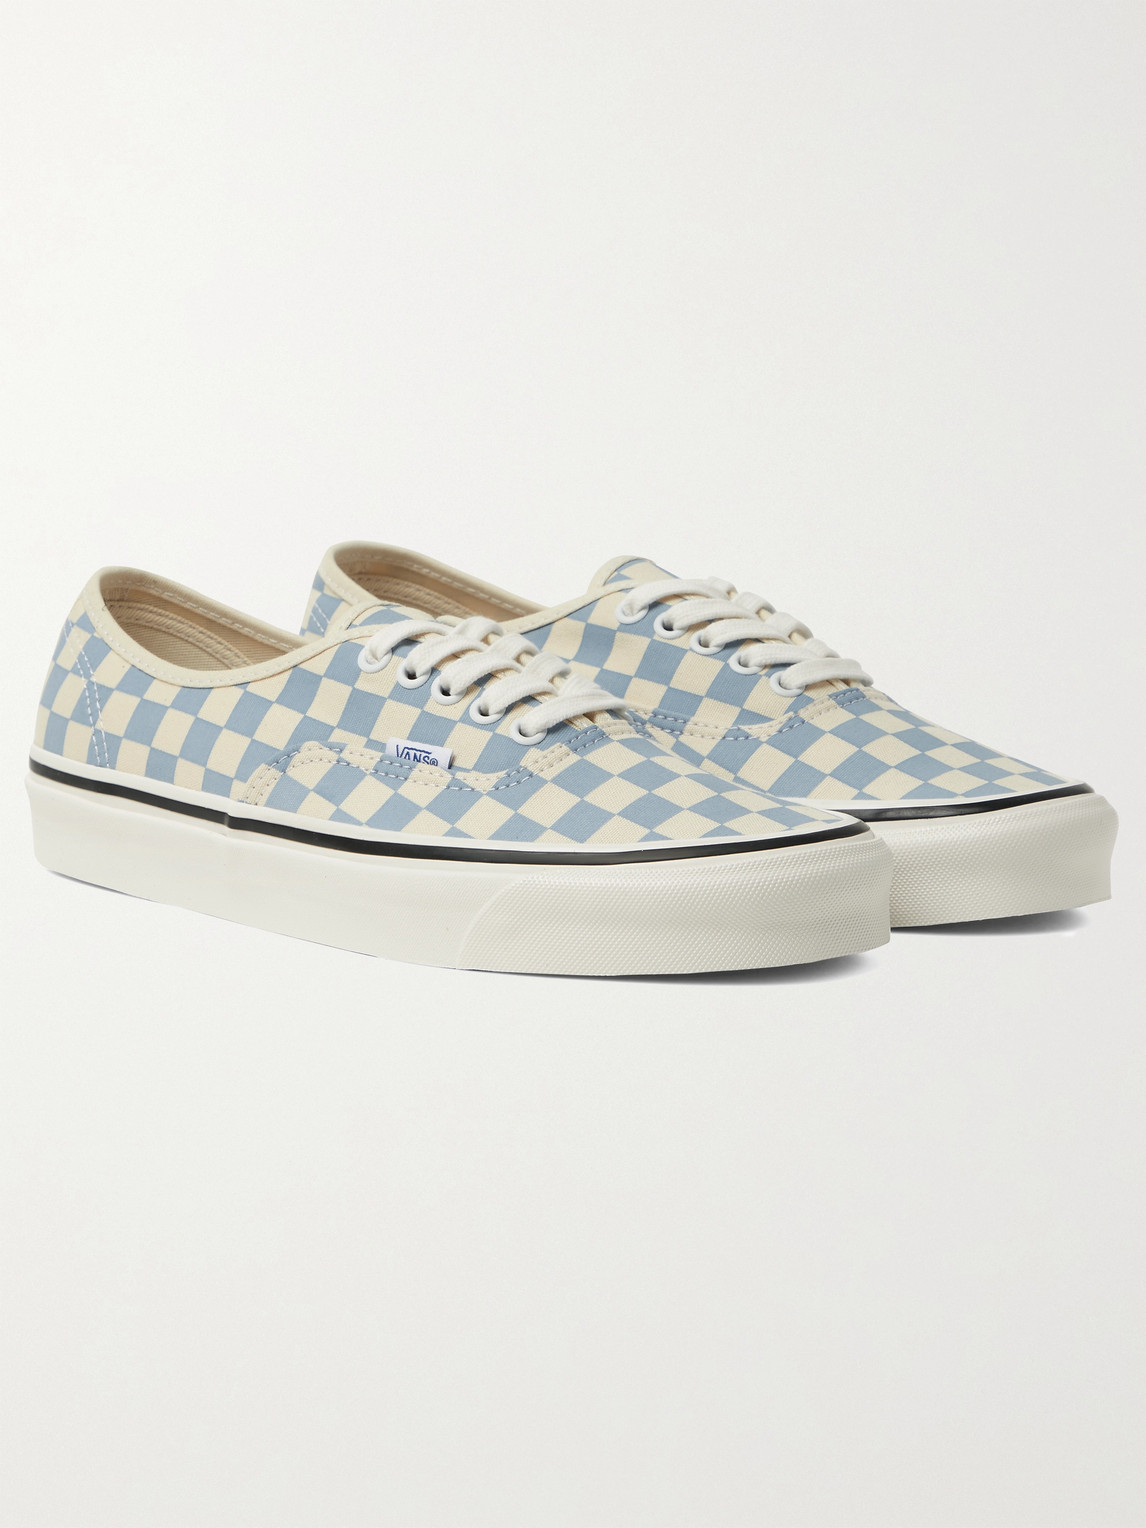 VANS ANAHEIM FACTORY AUTHENTIC 44 DX CHECKERBOARD CANVAS SNEAKERS